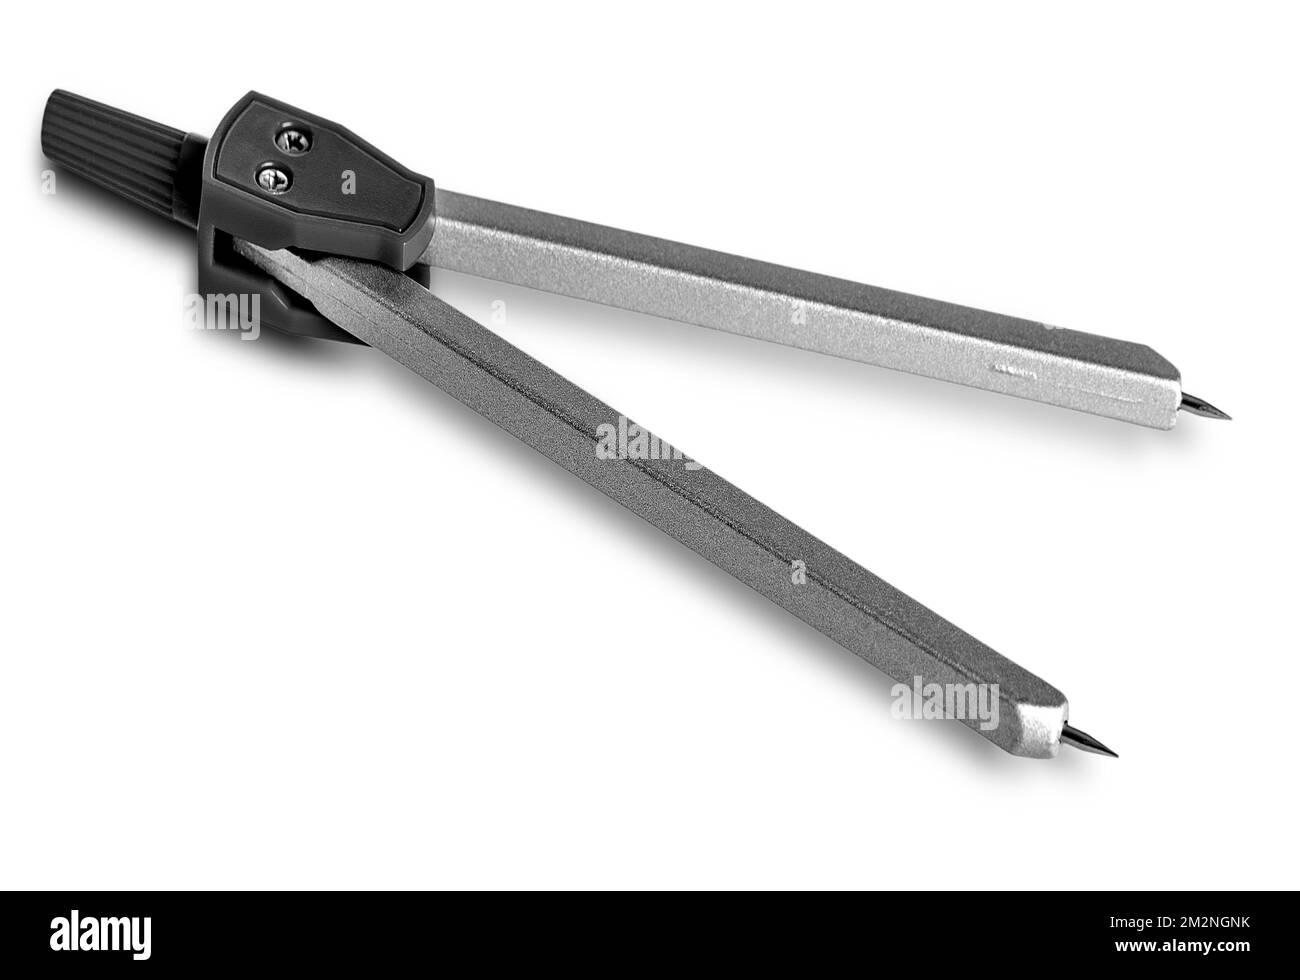 The close up metal compasses for drawing, isolated on white background. Hand delimiters, tool draftsman Stock Photo